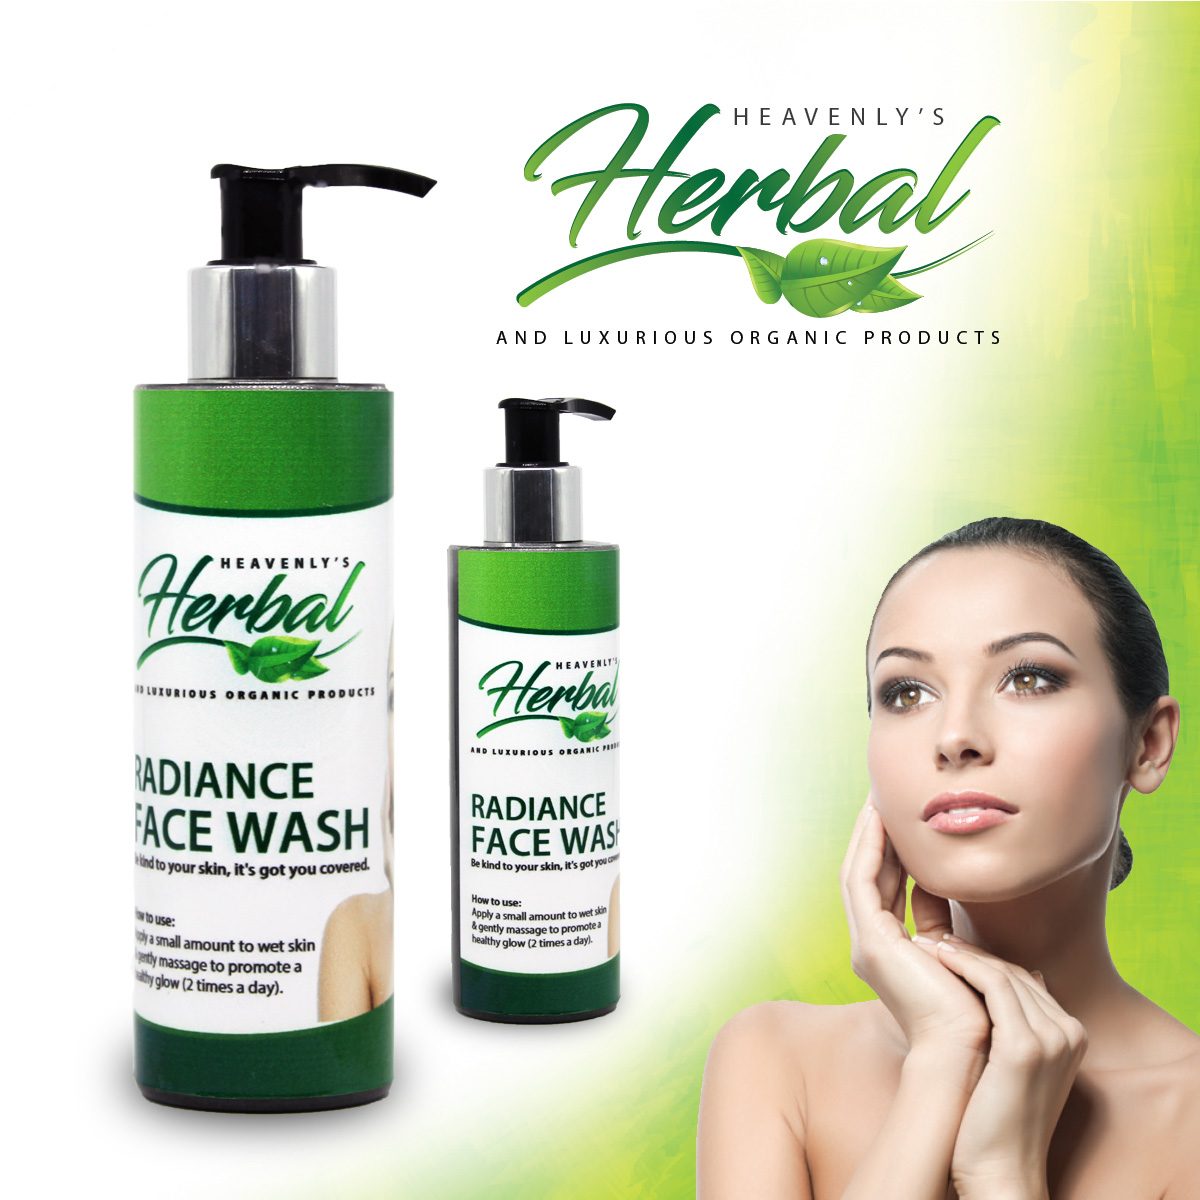 Radiance beauty face wash cleanse & remove excess dirt skincare refresh